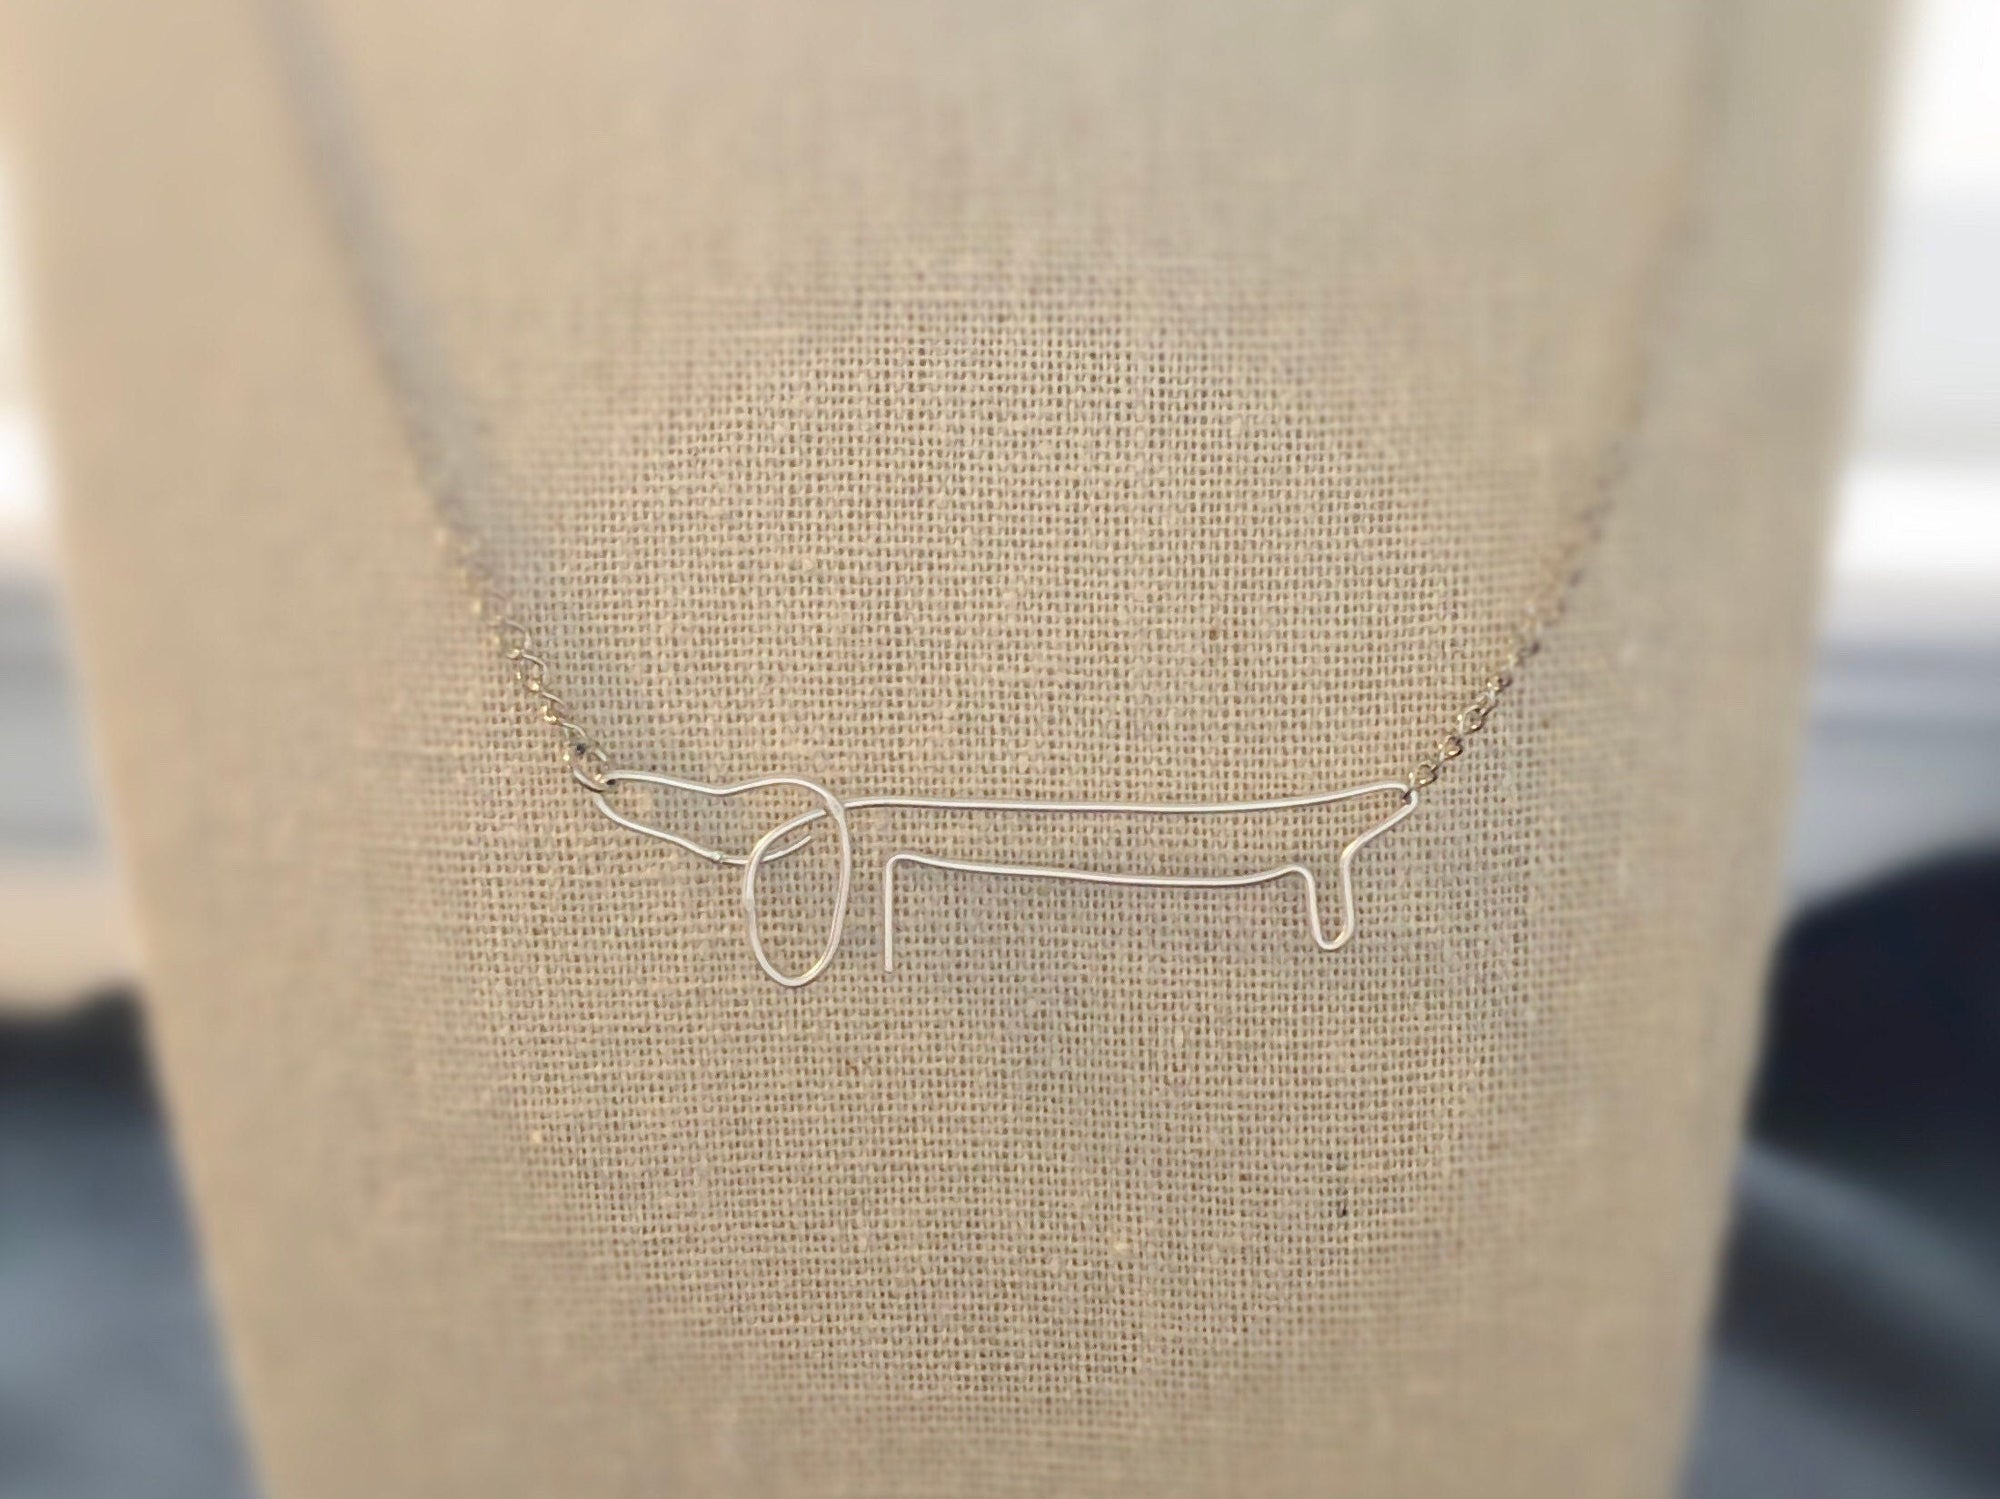 Sterling silver sausage dog dachshund gifts • Pablo Picasso doxie wearable art • Longhaired dachshund art • Picasso reproduction dachshund